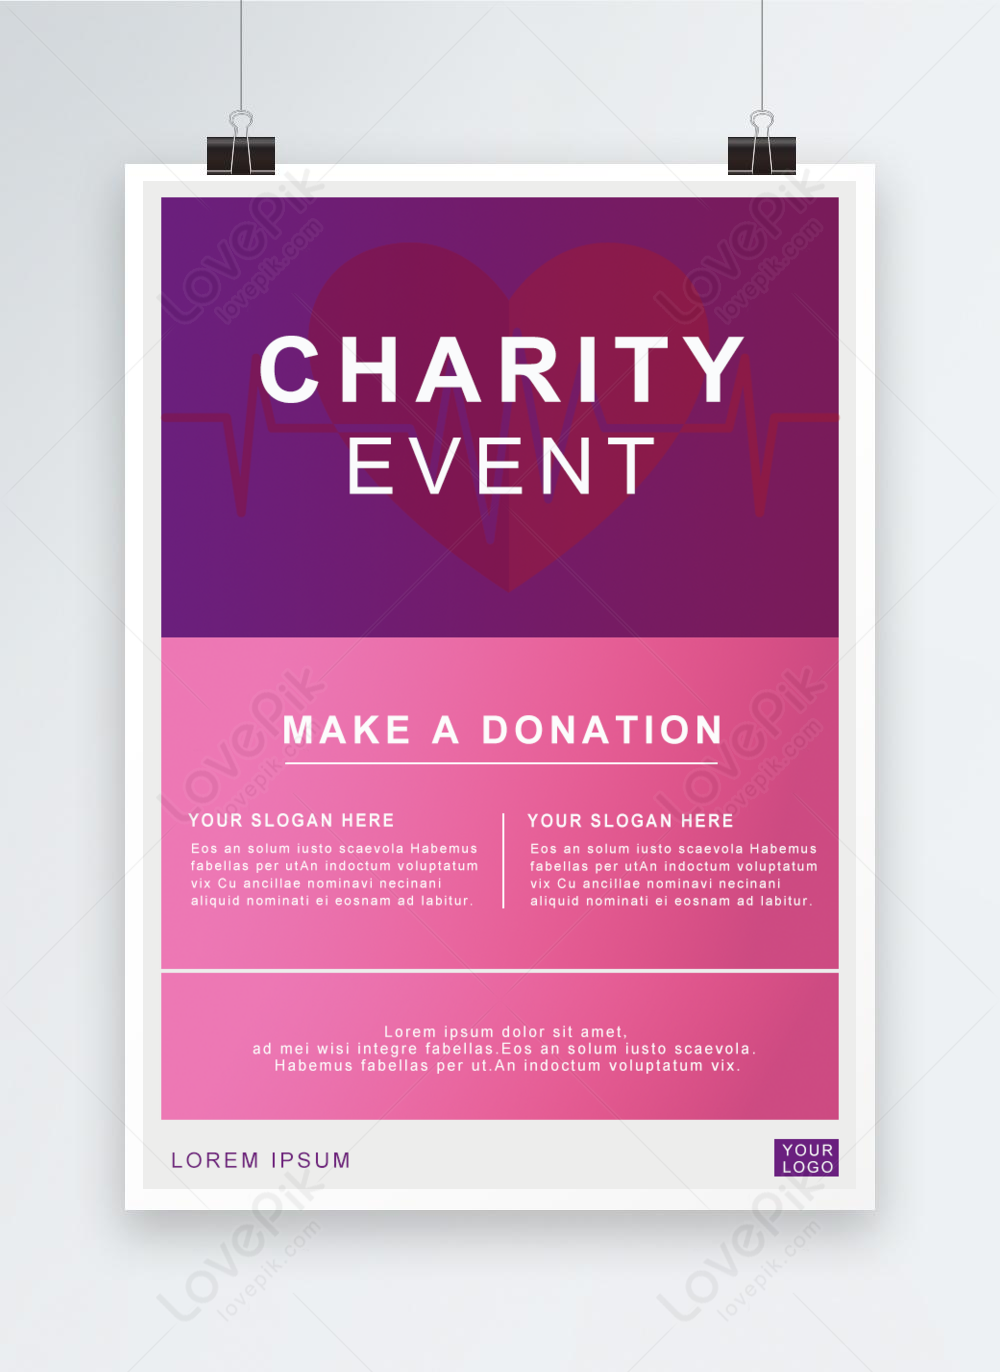 fundraiser event posters